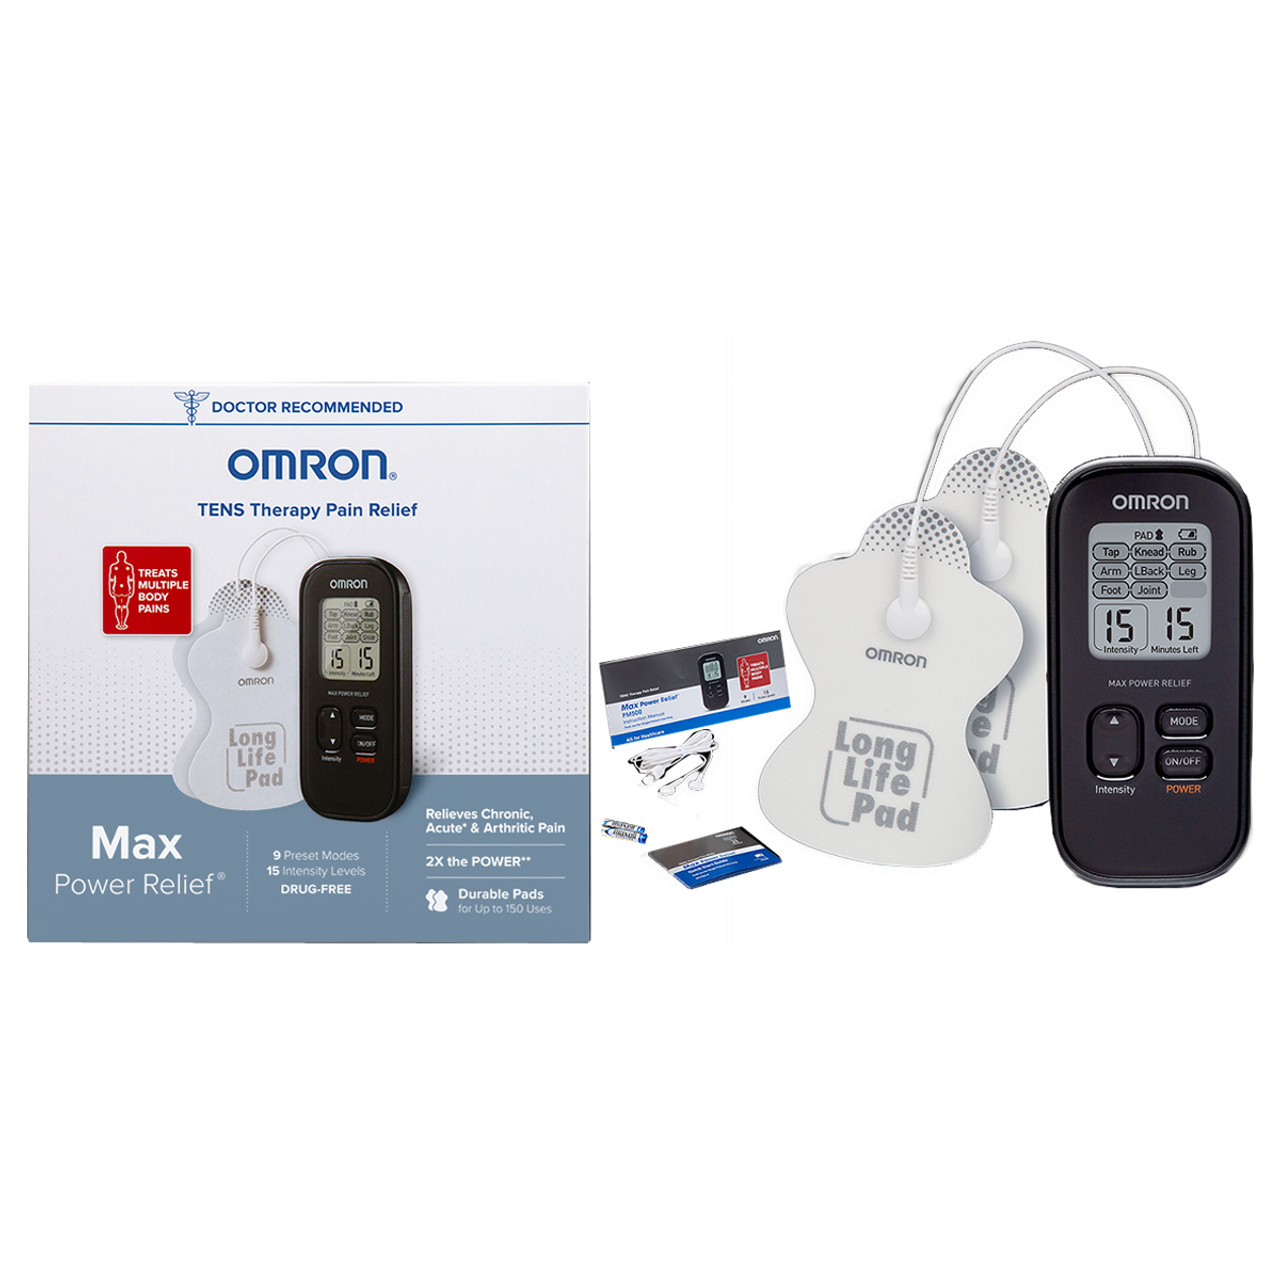 Omron PM800 Total Power + Heat Tens Device